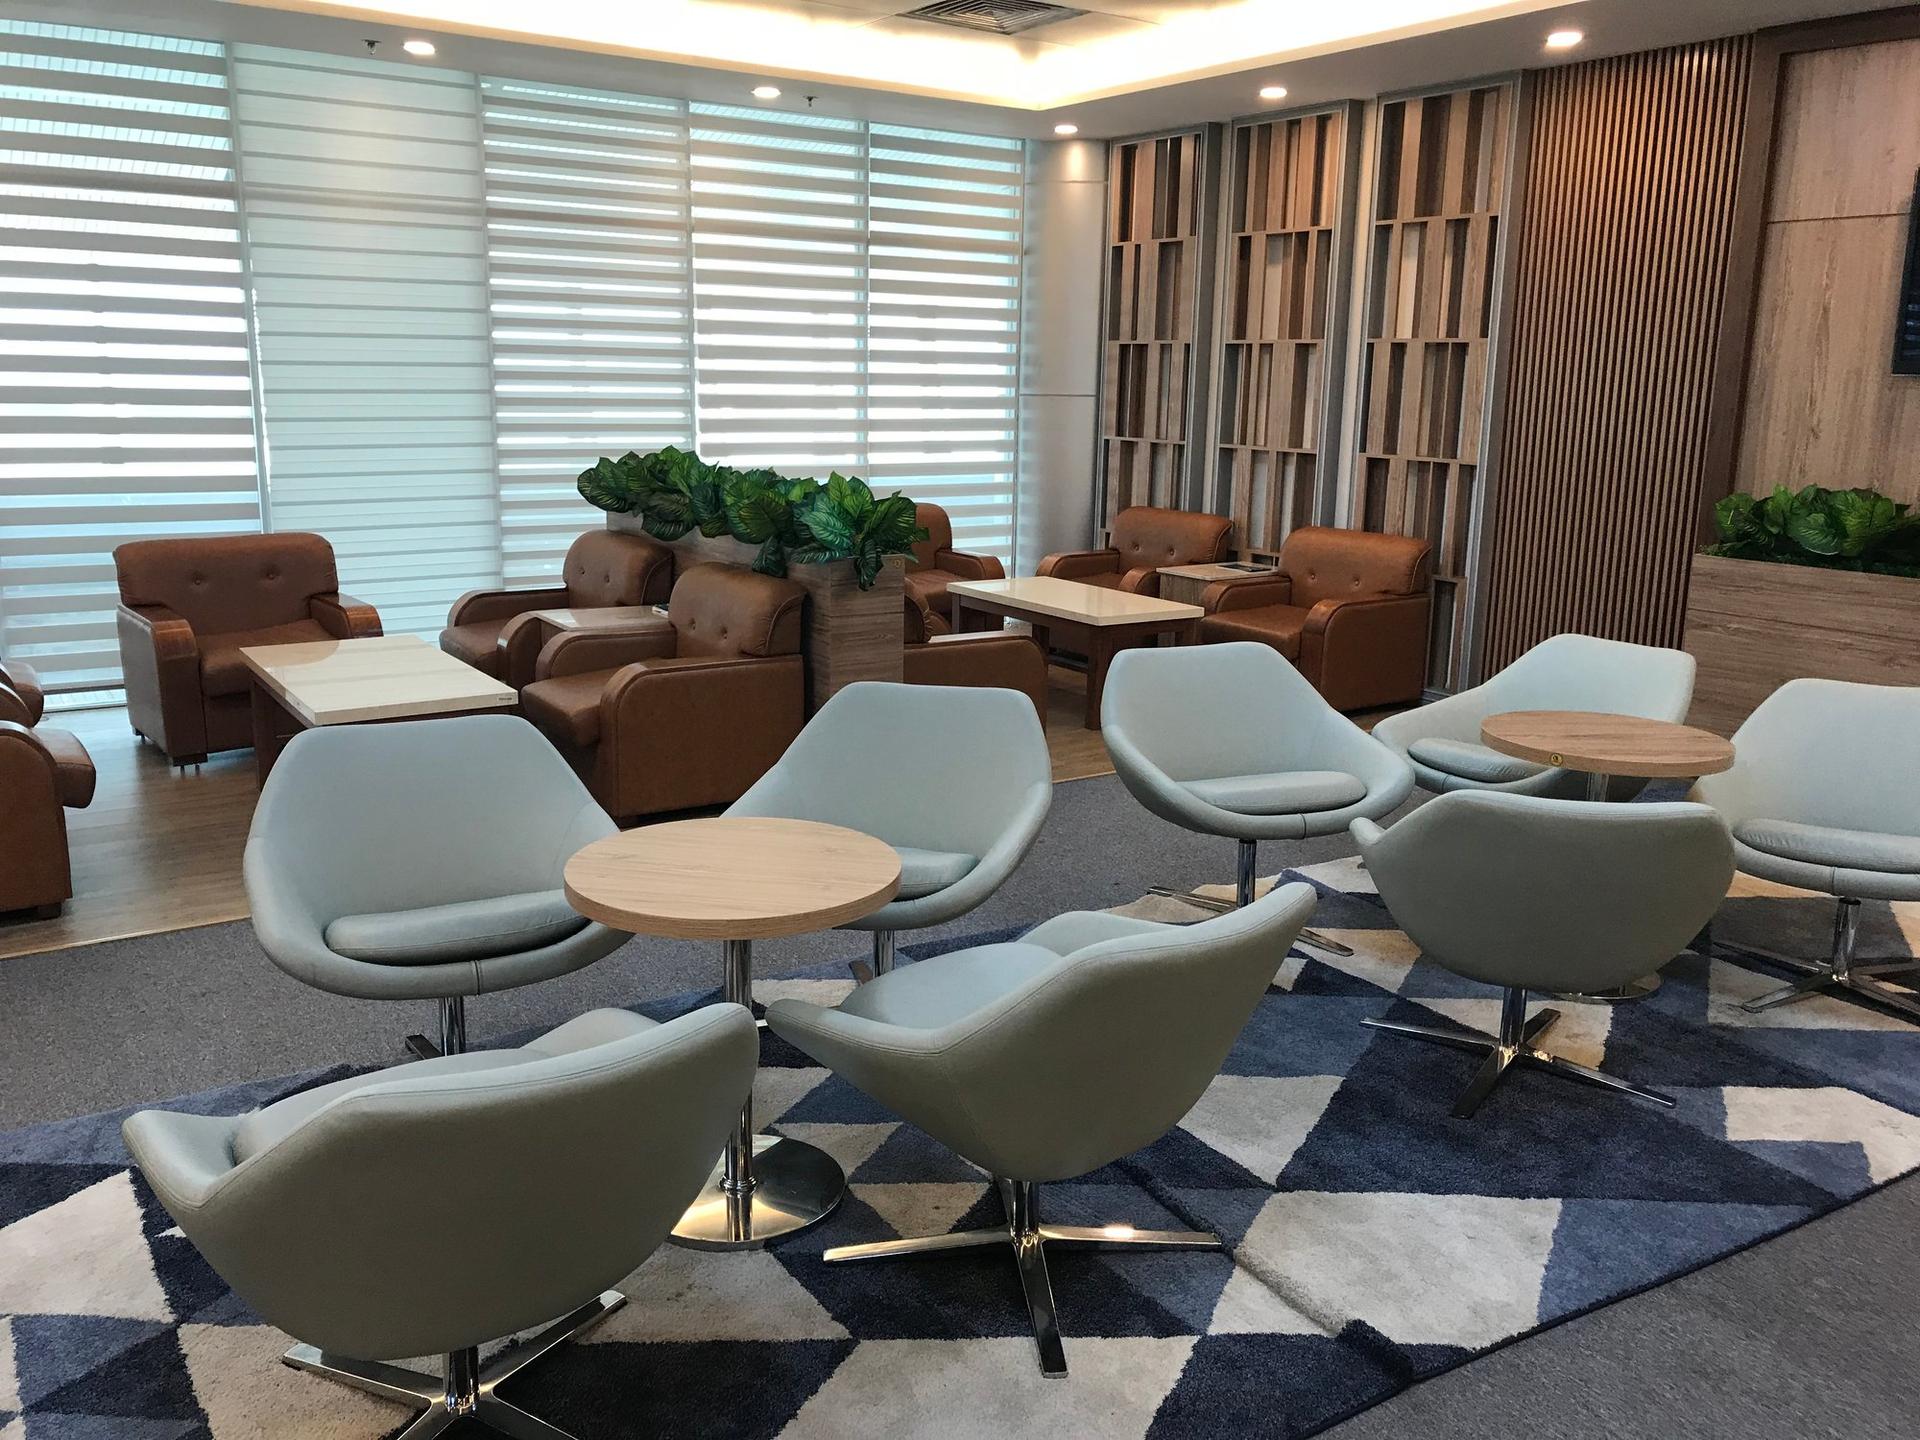 Vietnam Airlines Lounge (Domestic) image 1 of 11